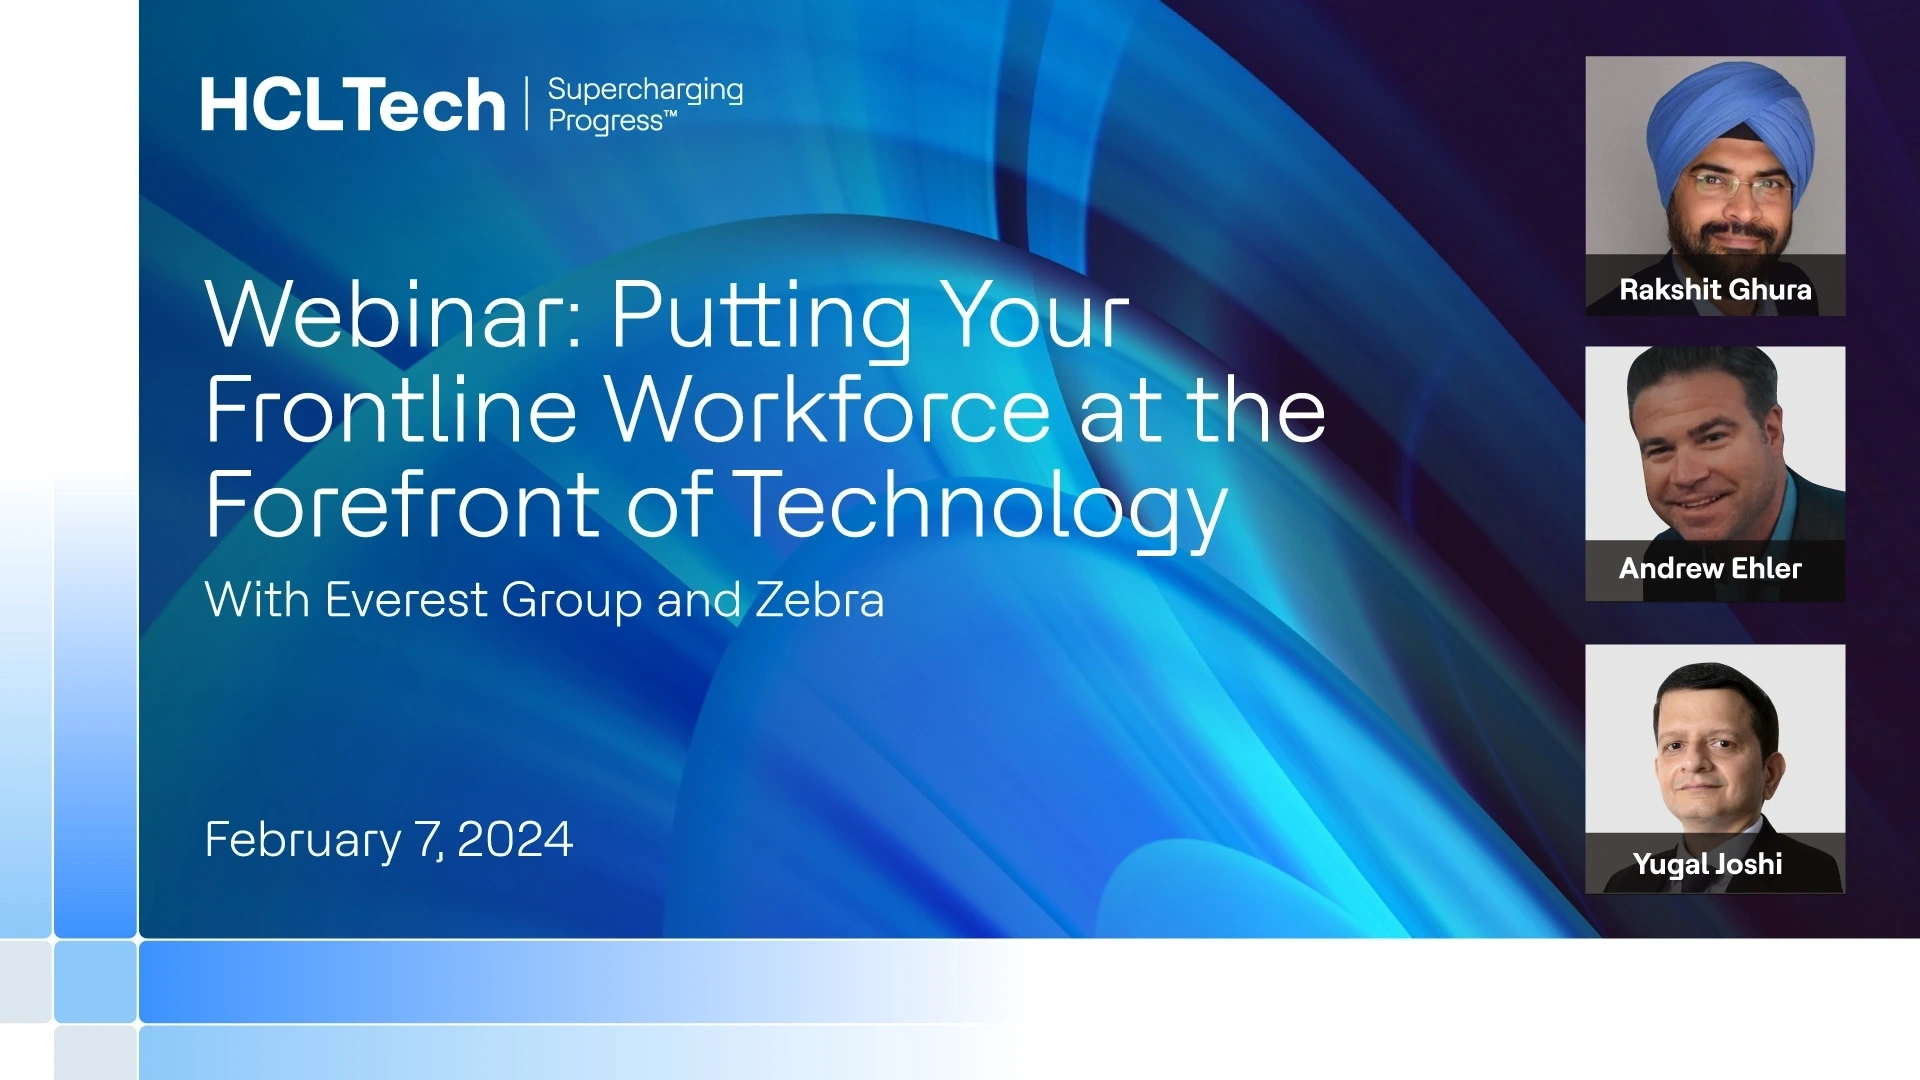 Putting your frontline workforce at the forefront of technology